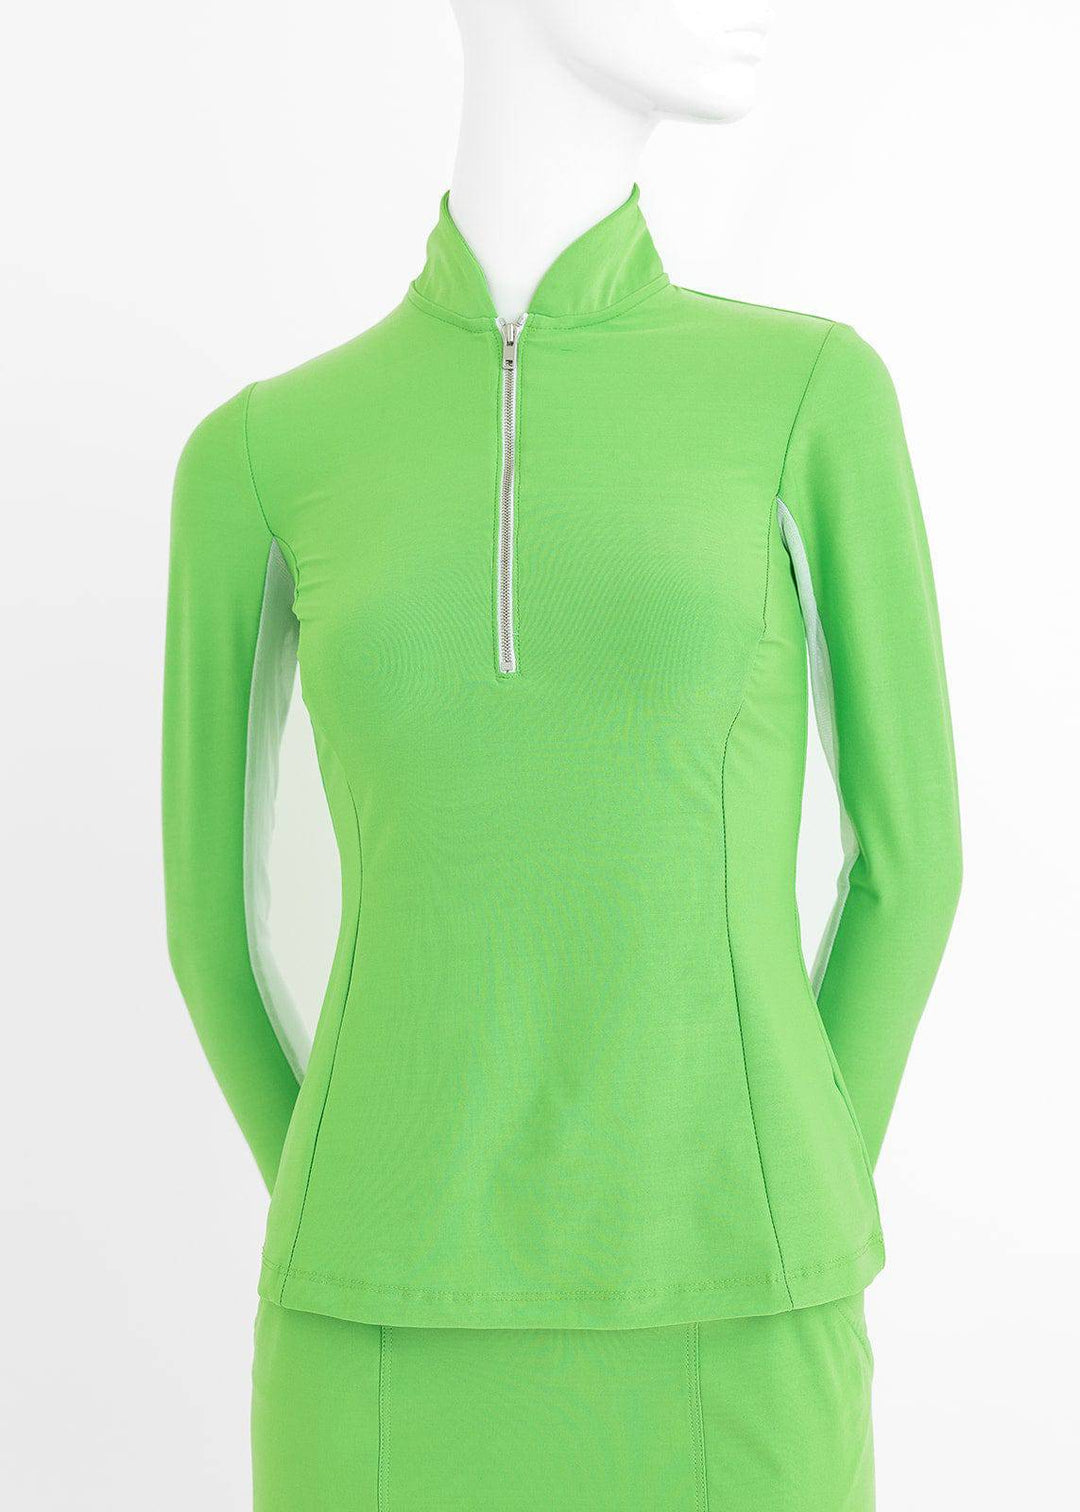 Amy Sport Amy Sport Katelyn 2.0 Long Sleeved Top - Lime - All Sizes Petite